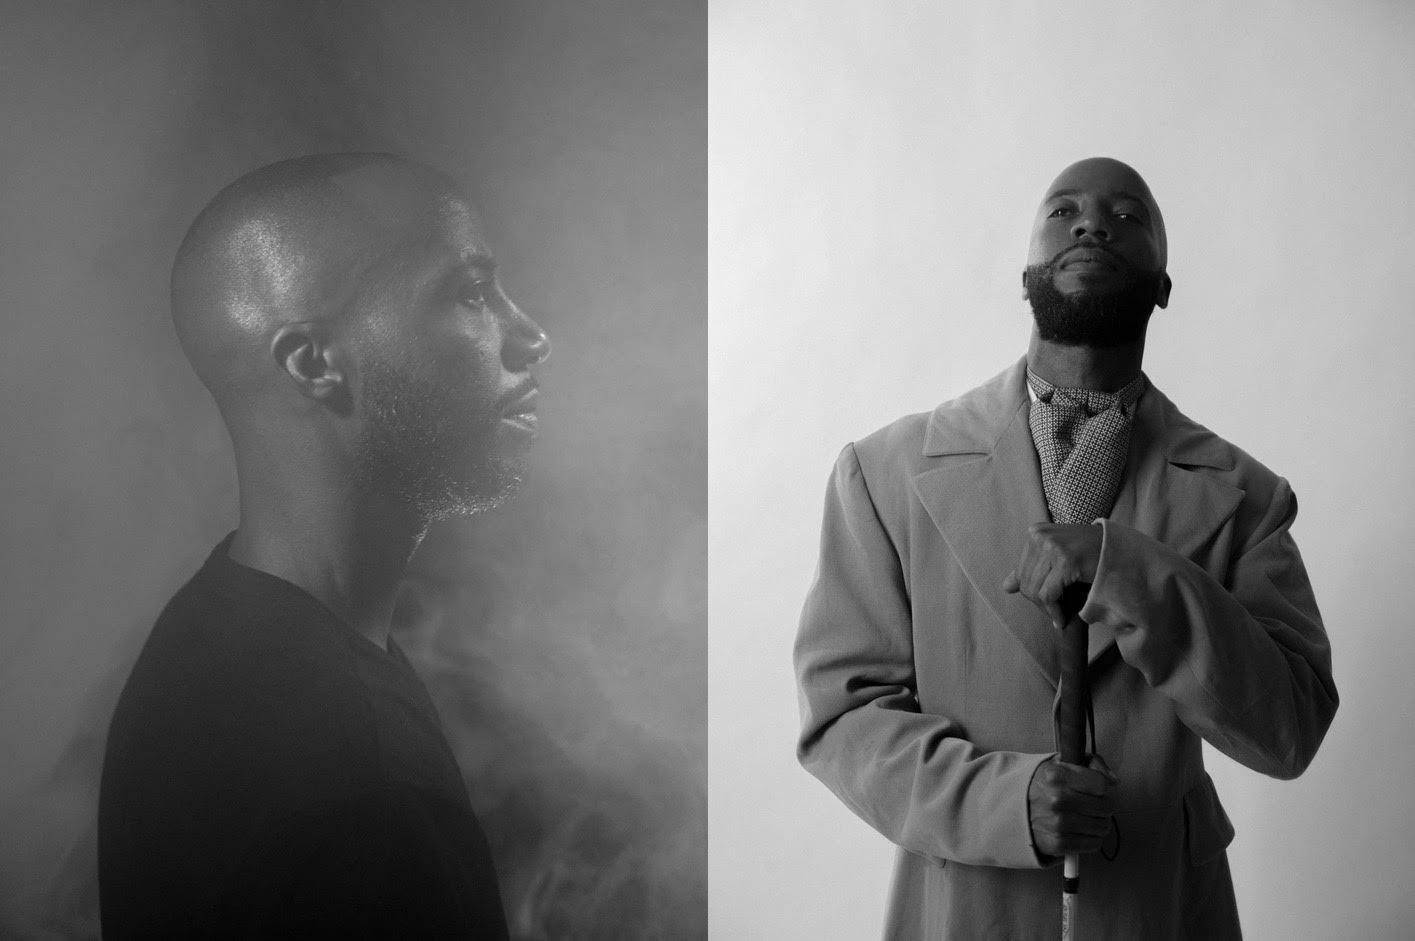 Two black and white photos of blind artist Ronnie Chism - on the left, he's in profile with smoke swirling around him. On the right, he's wearing a suit, looking up and smiling while holding his mobility cane in front of him.